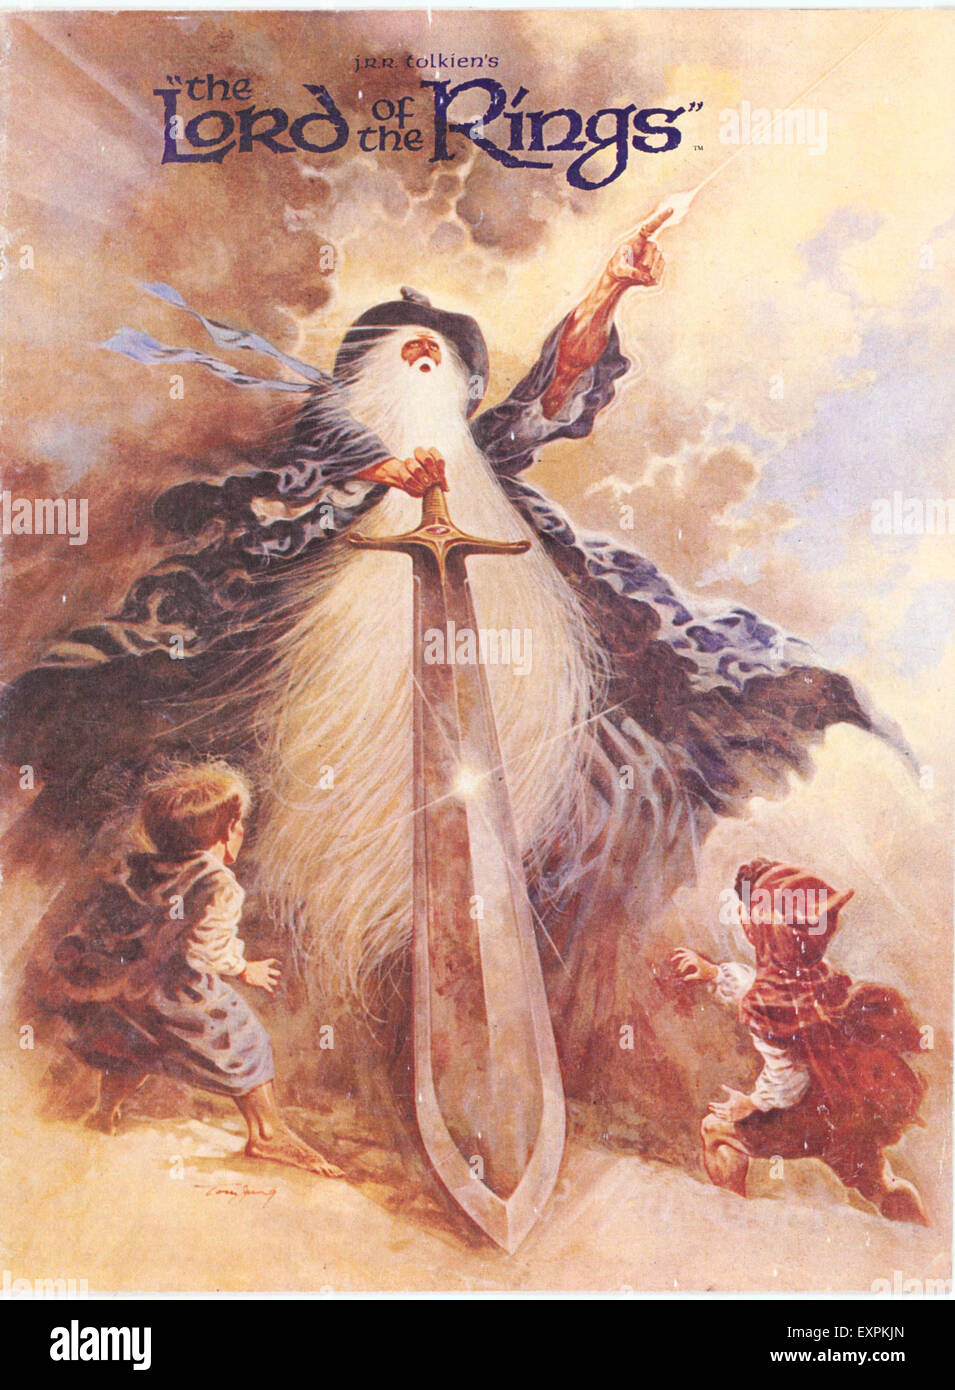 1970s USA The Lord Of The Rings Poster Stock Photo